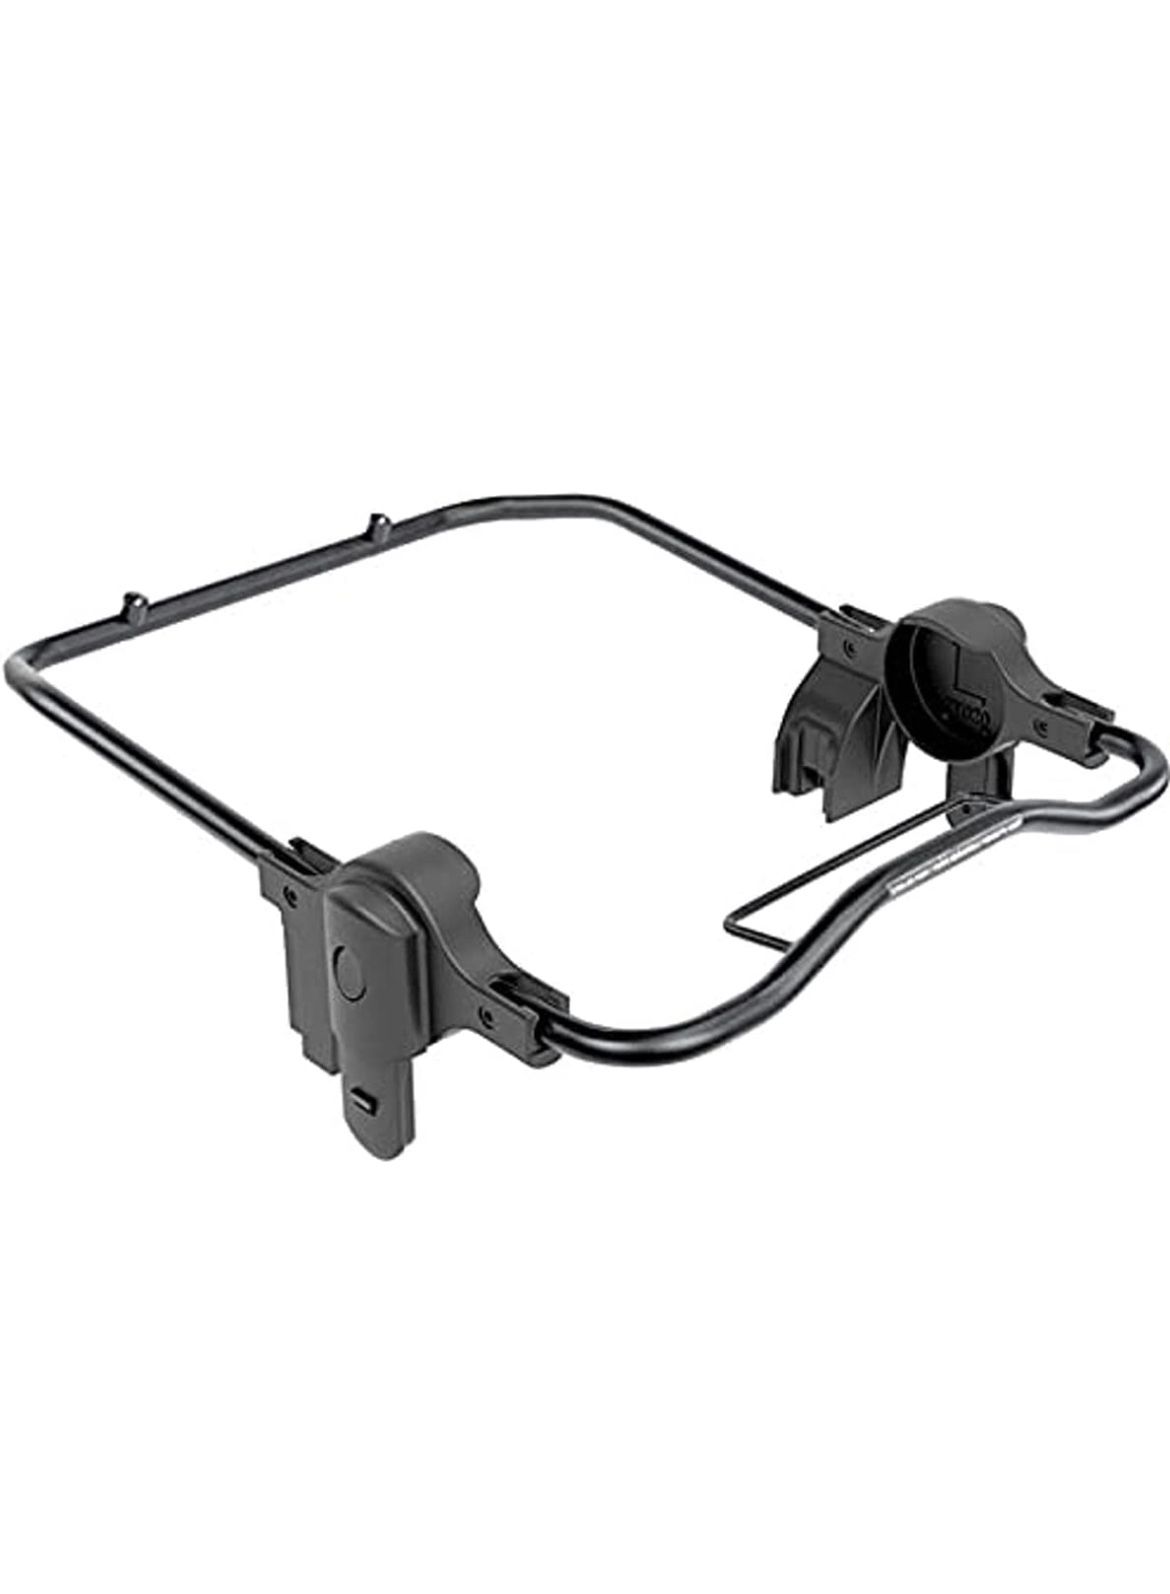 Contours V2 Infant Car Seat Adapter - Compatible with Select Graco Infant Car Seats - Exclusively for Contours Strollers